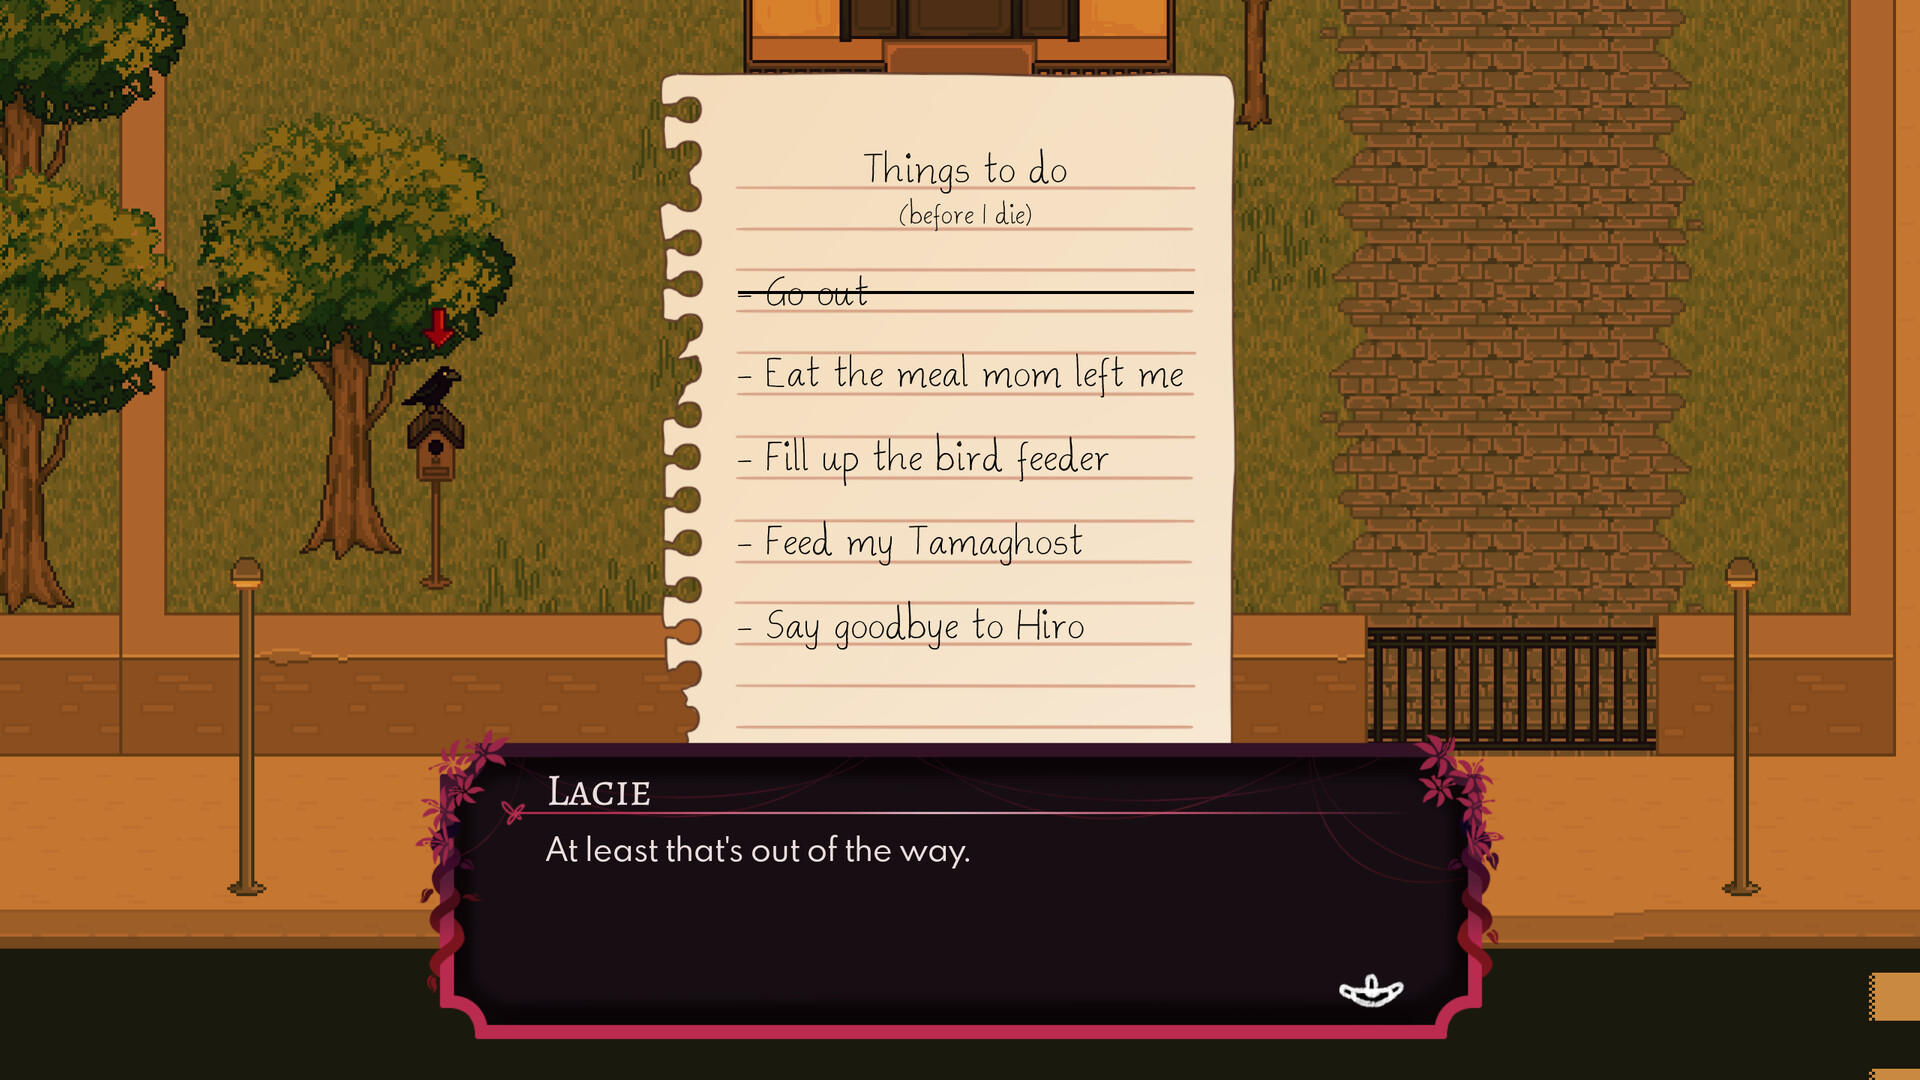 Paper Lily - Chapter 1 screenshot game